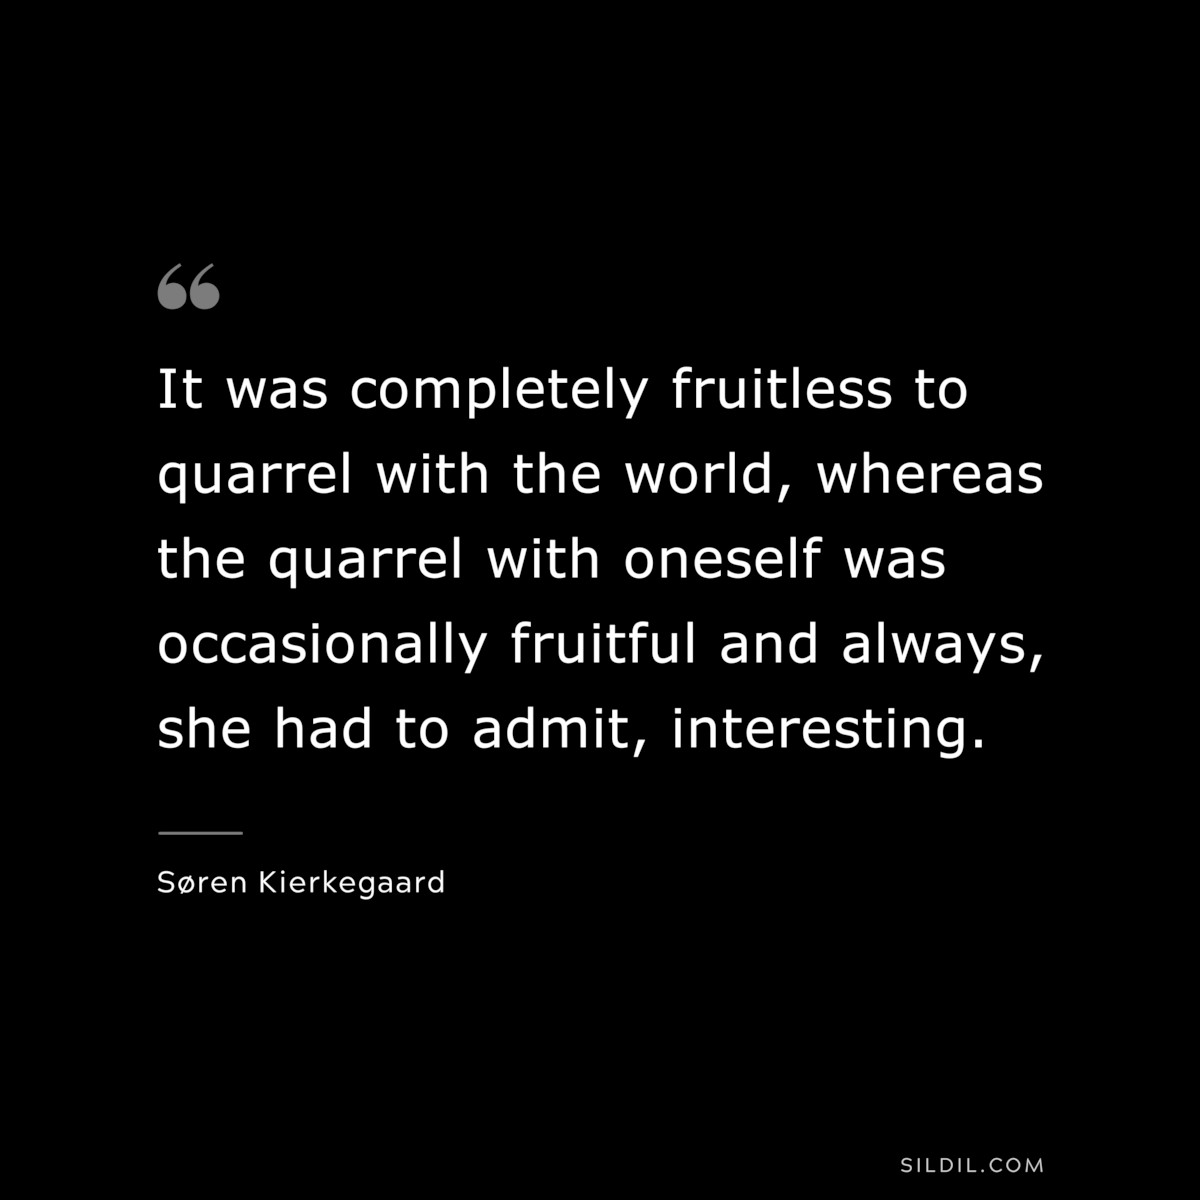 It was completely fruitless to quarrel with the world, whereas the quarrel with oneself was occasionally fruitful and always, she had to admit, interesting. ― Søren Kierkegaard